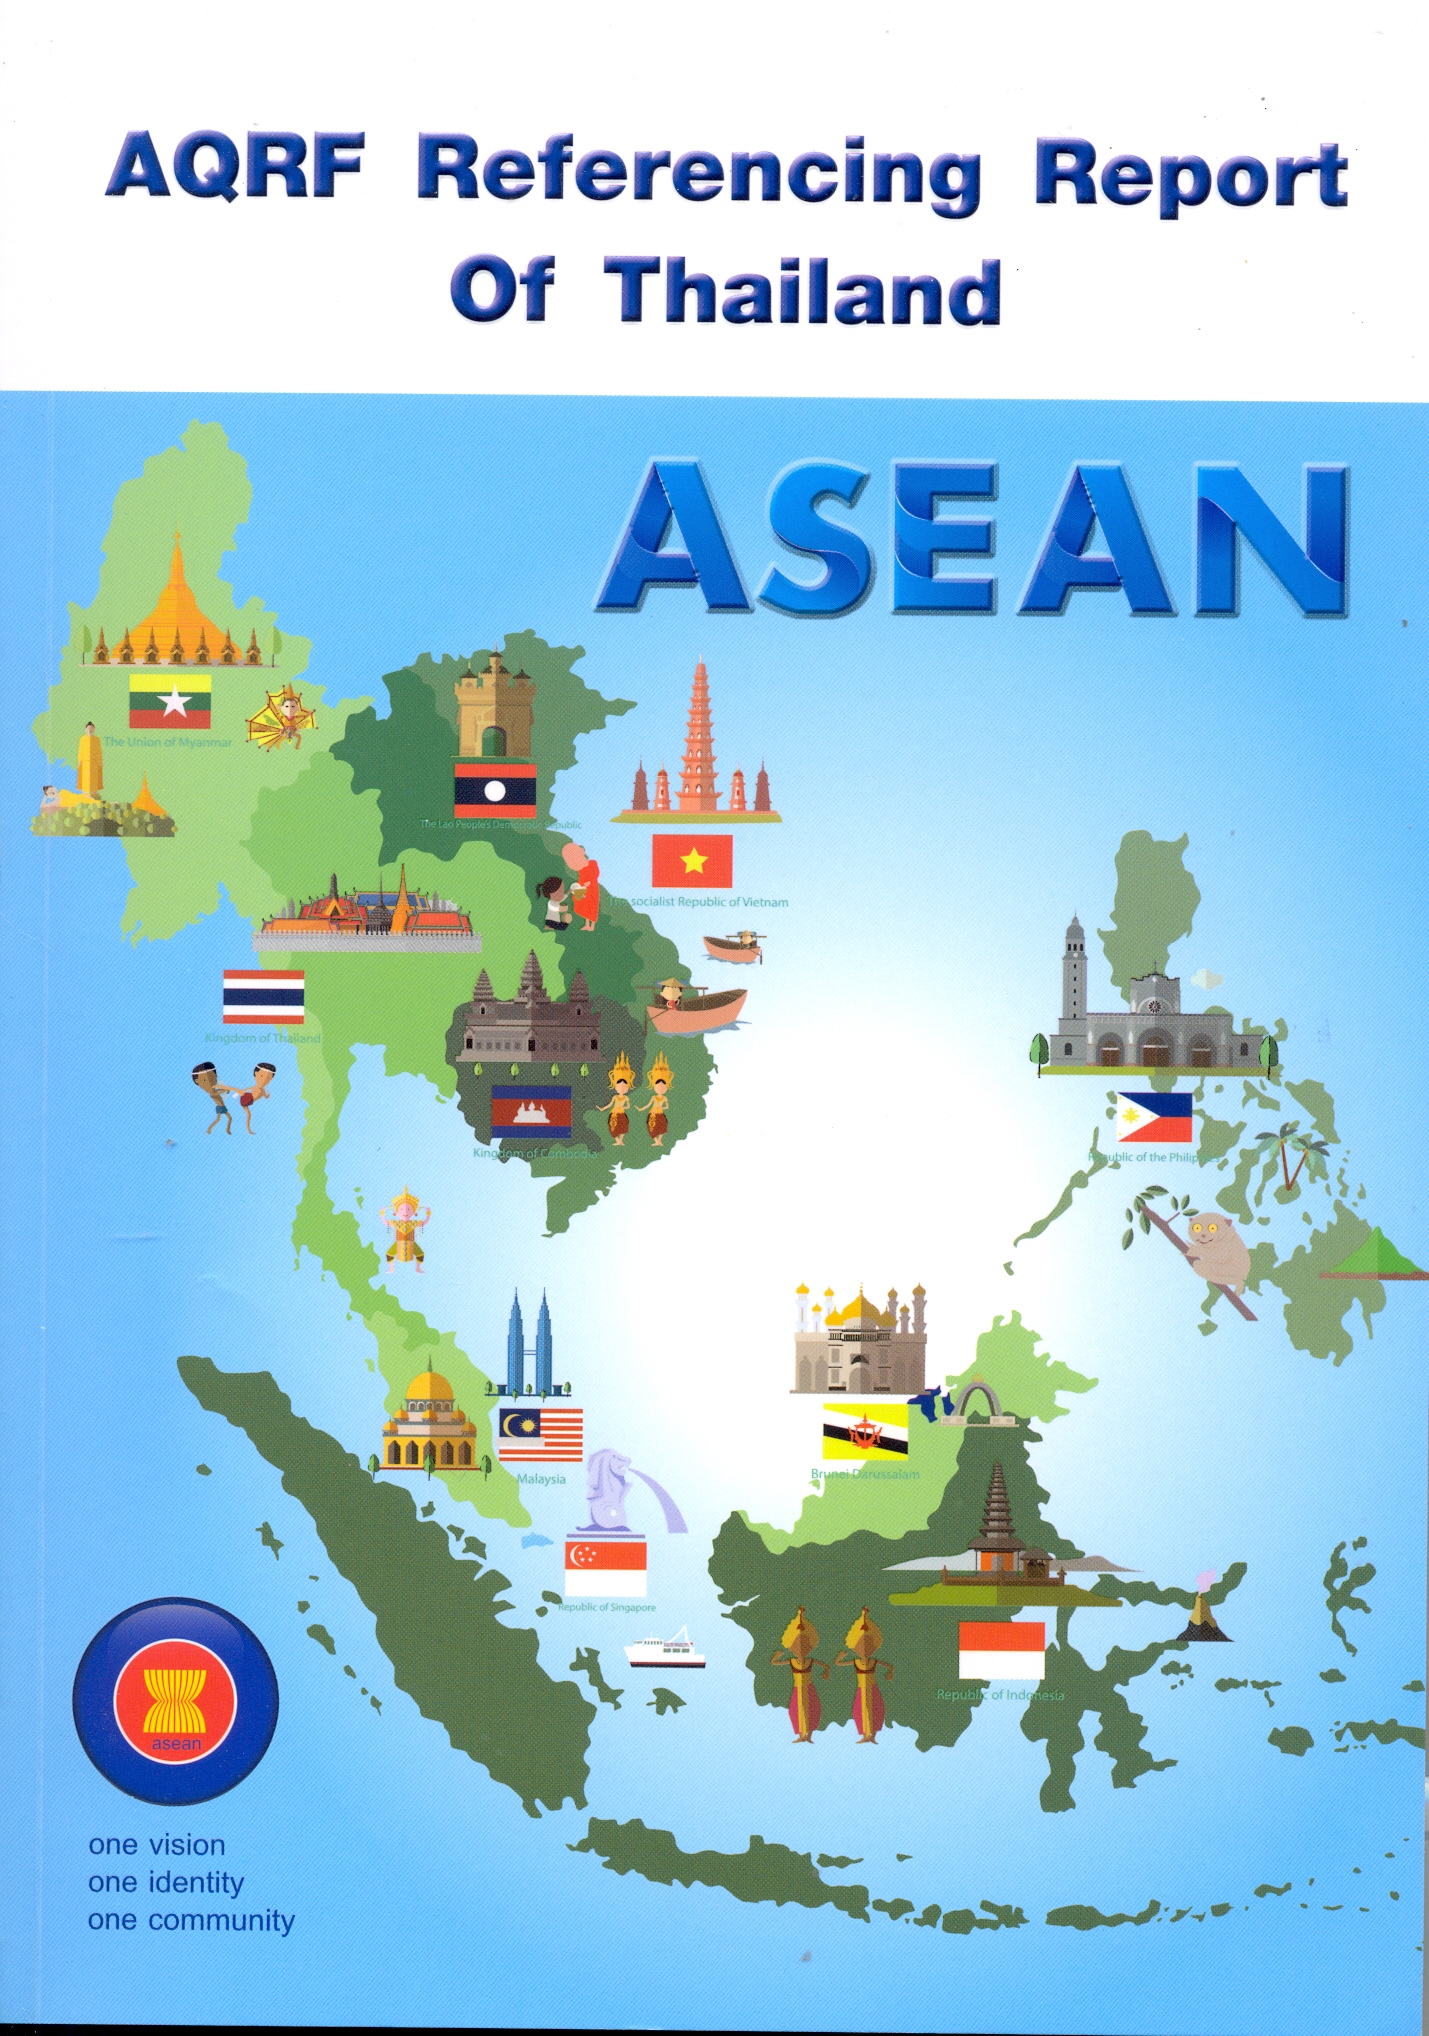 AQRF Referencing Report of Thailand